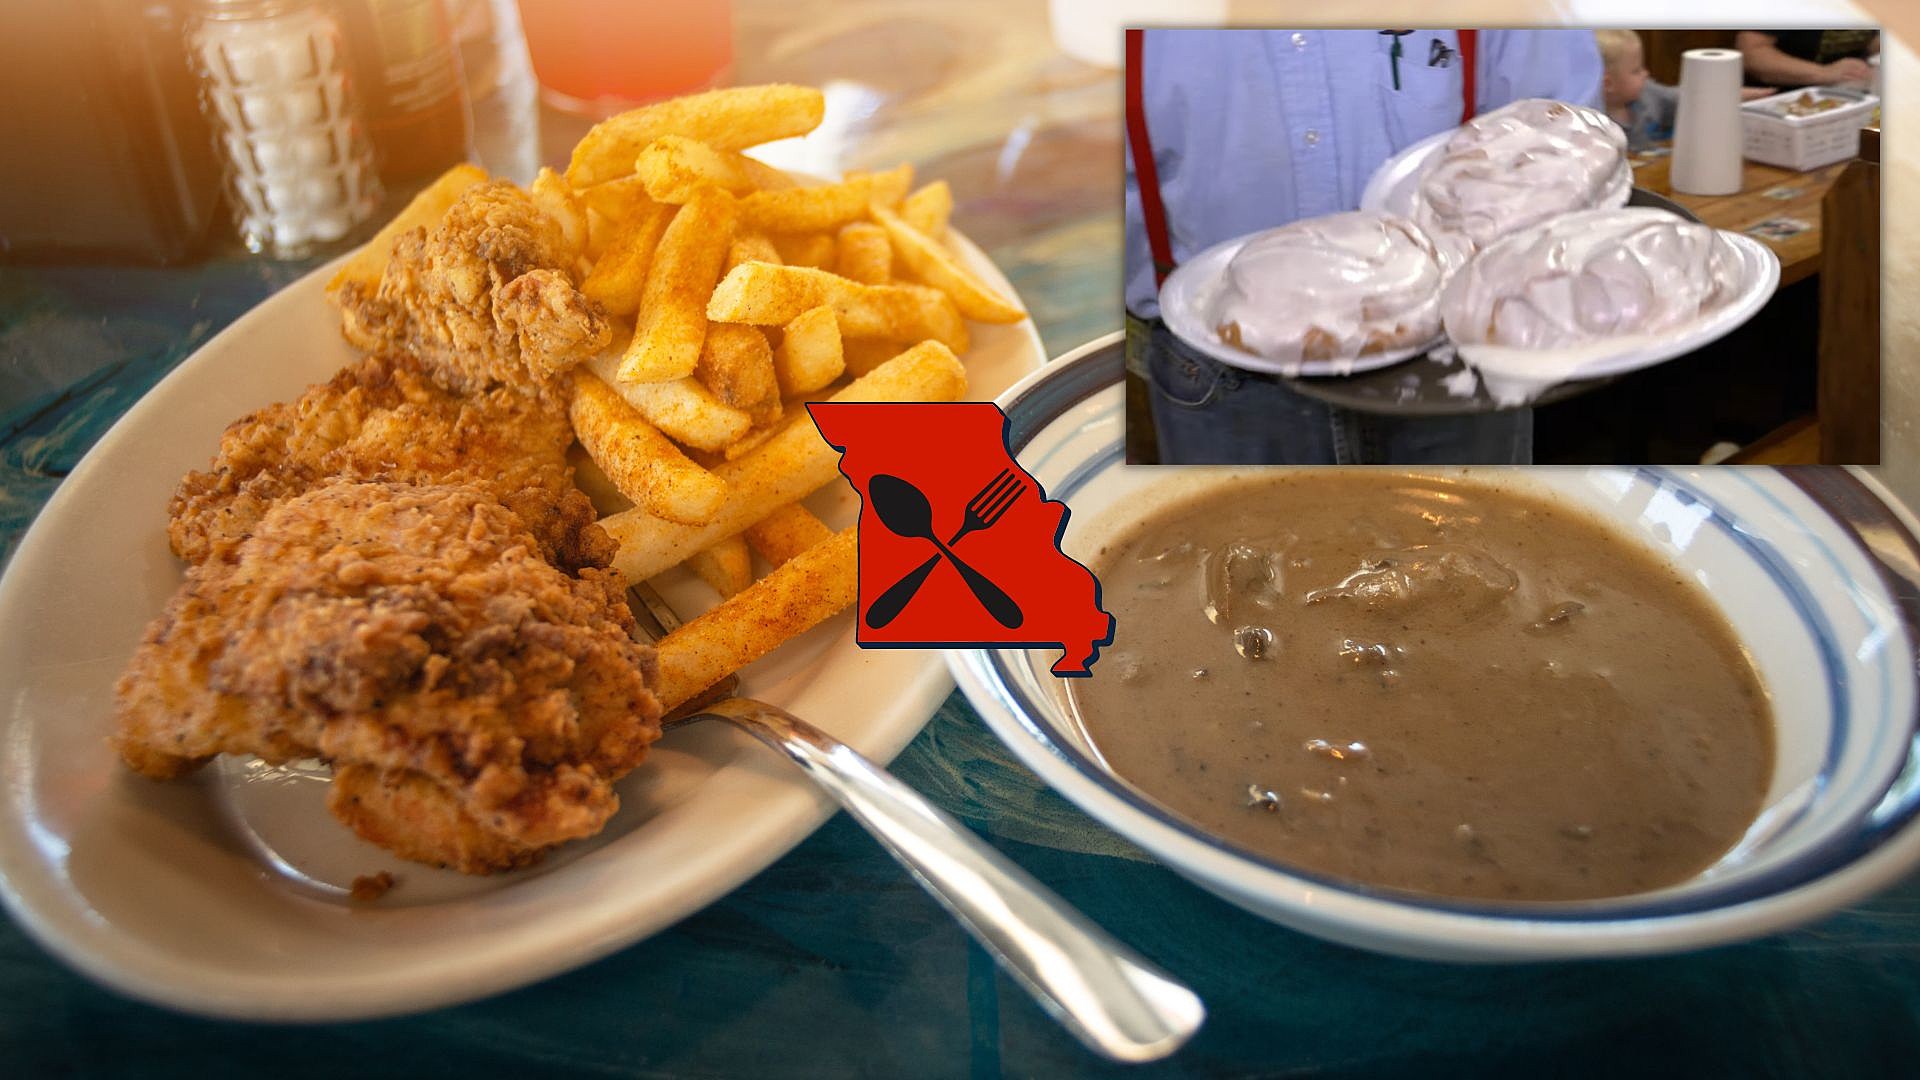 See the Place Voted the Best Comfort Food Youll Find in Missouri